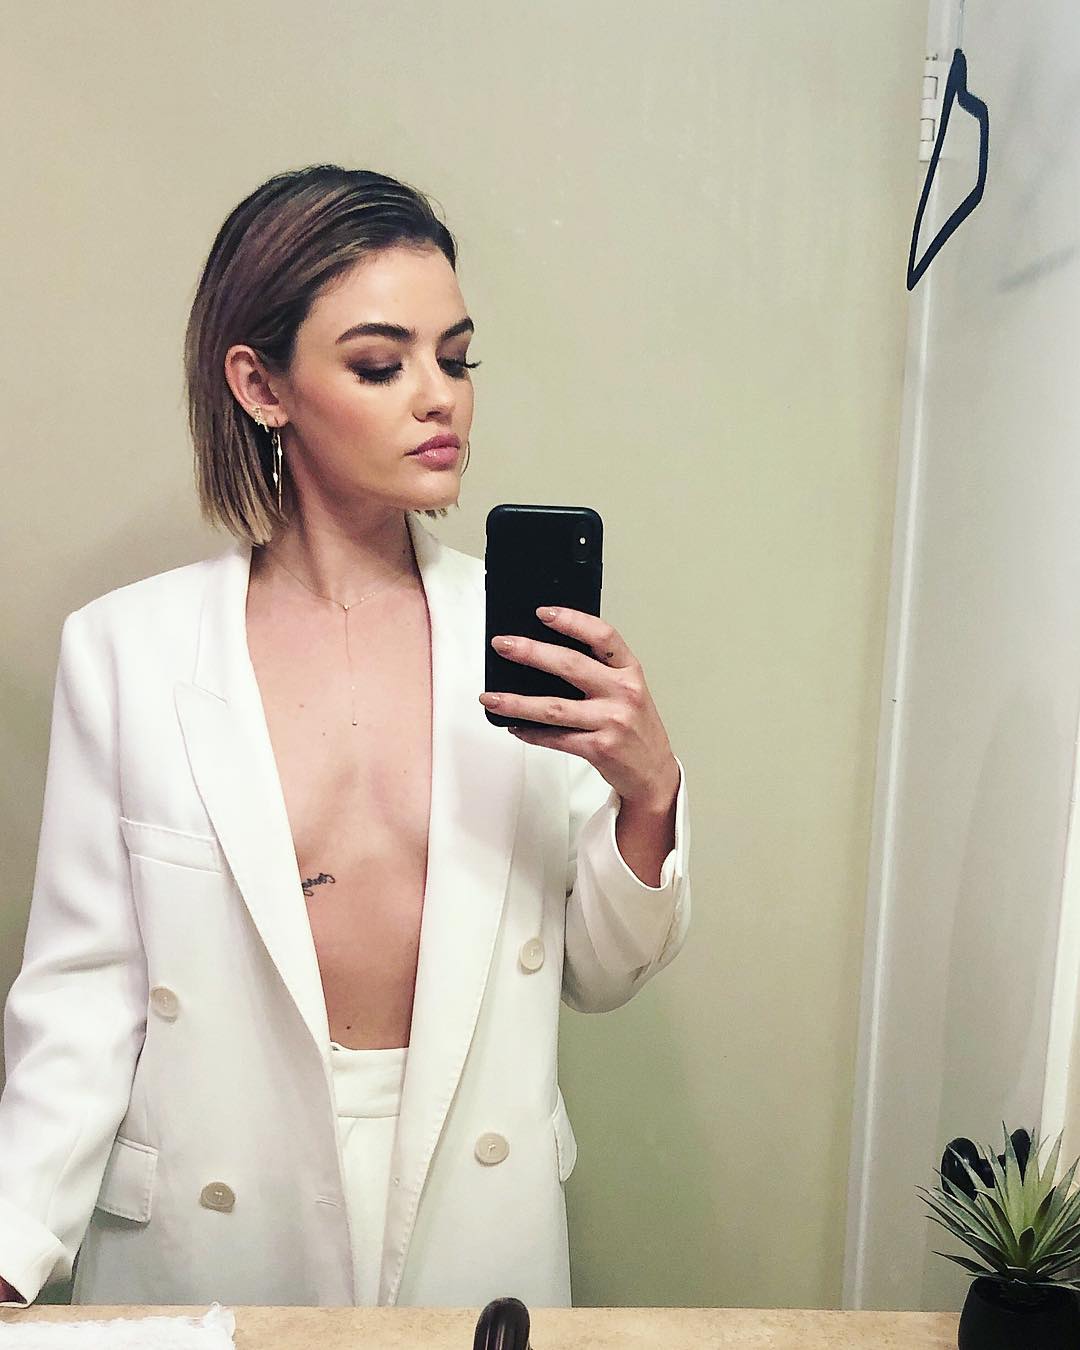 Topless lucy images hale Lucy Hale